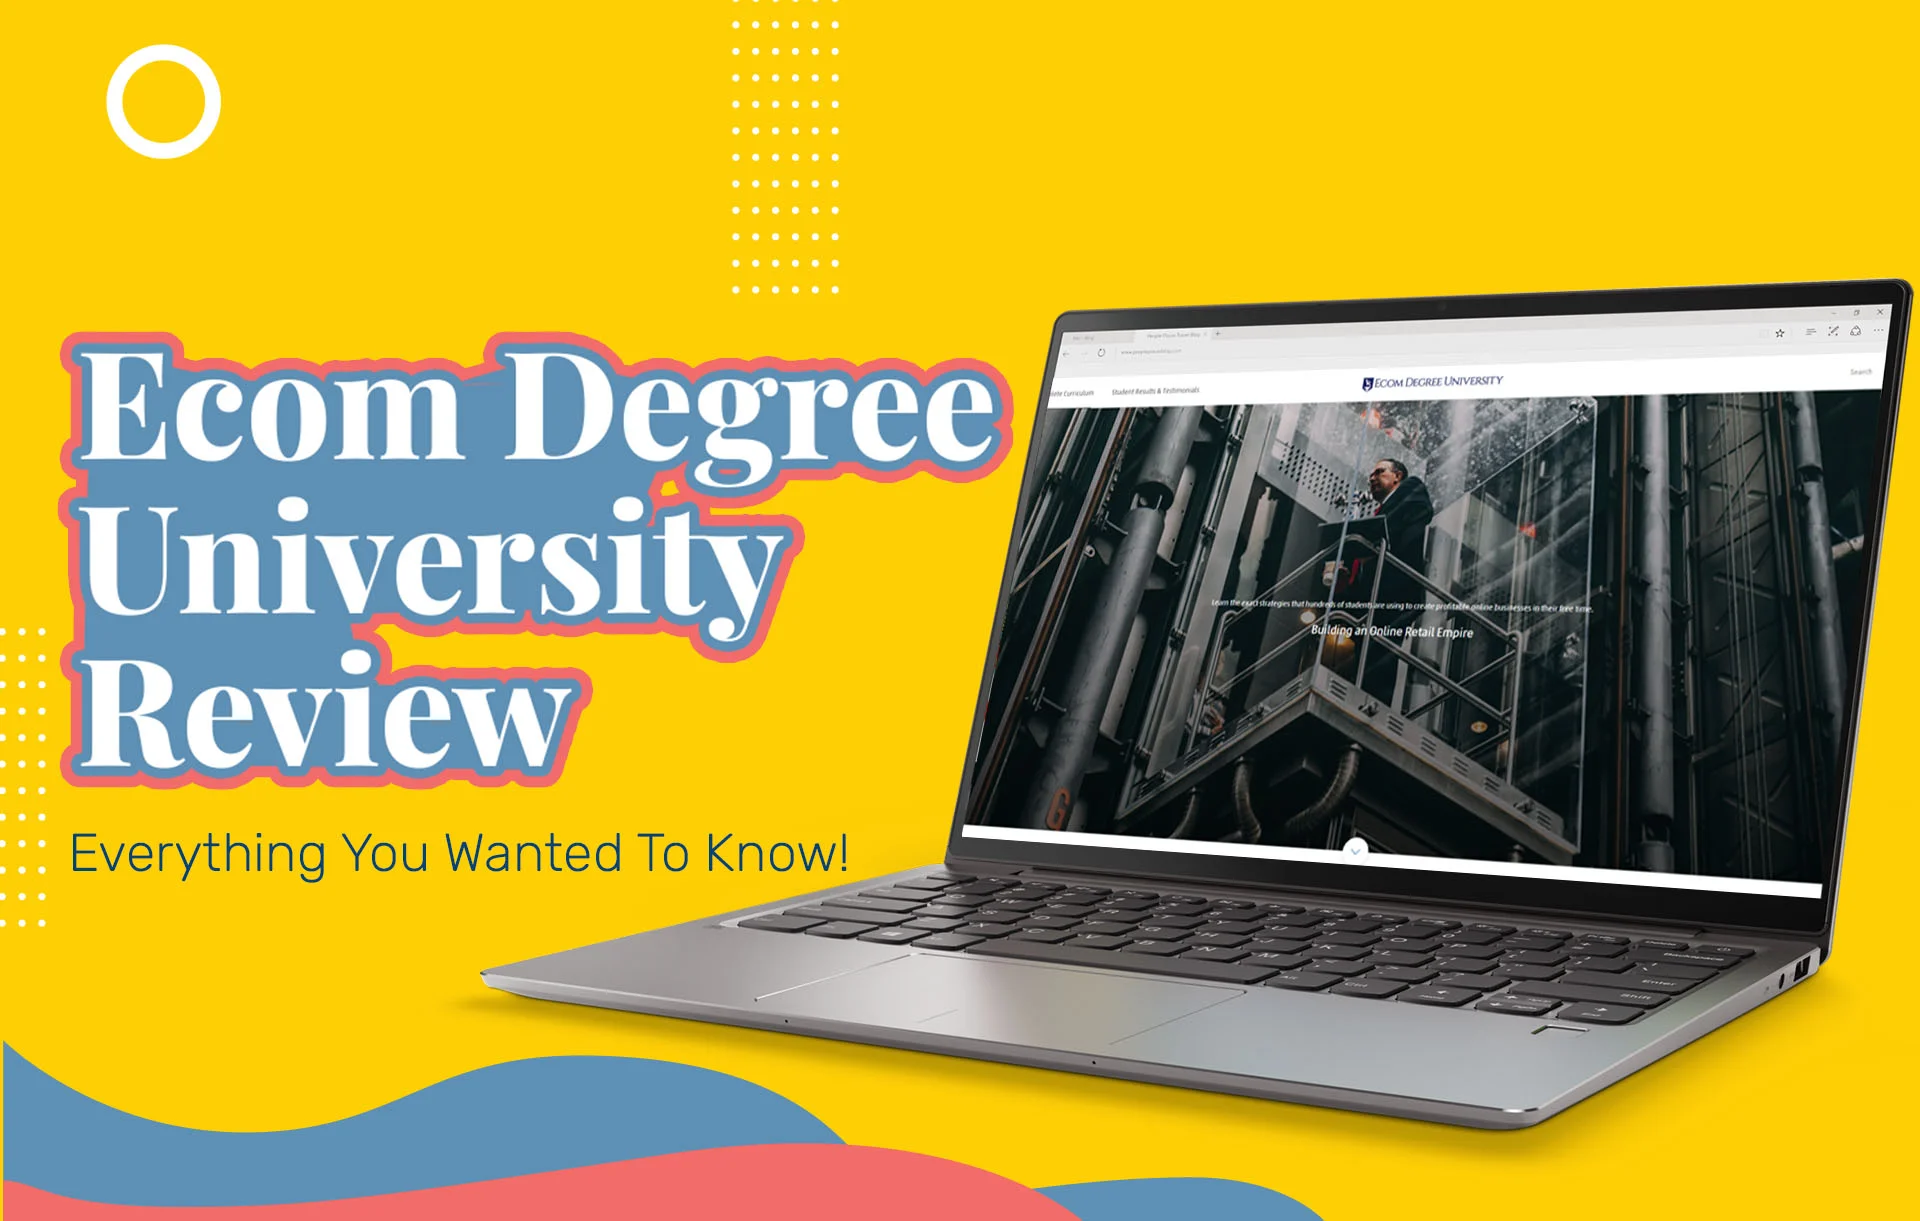 Ecom Degree University Reviews: Everything You Wanted To Know!